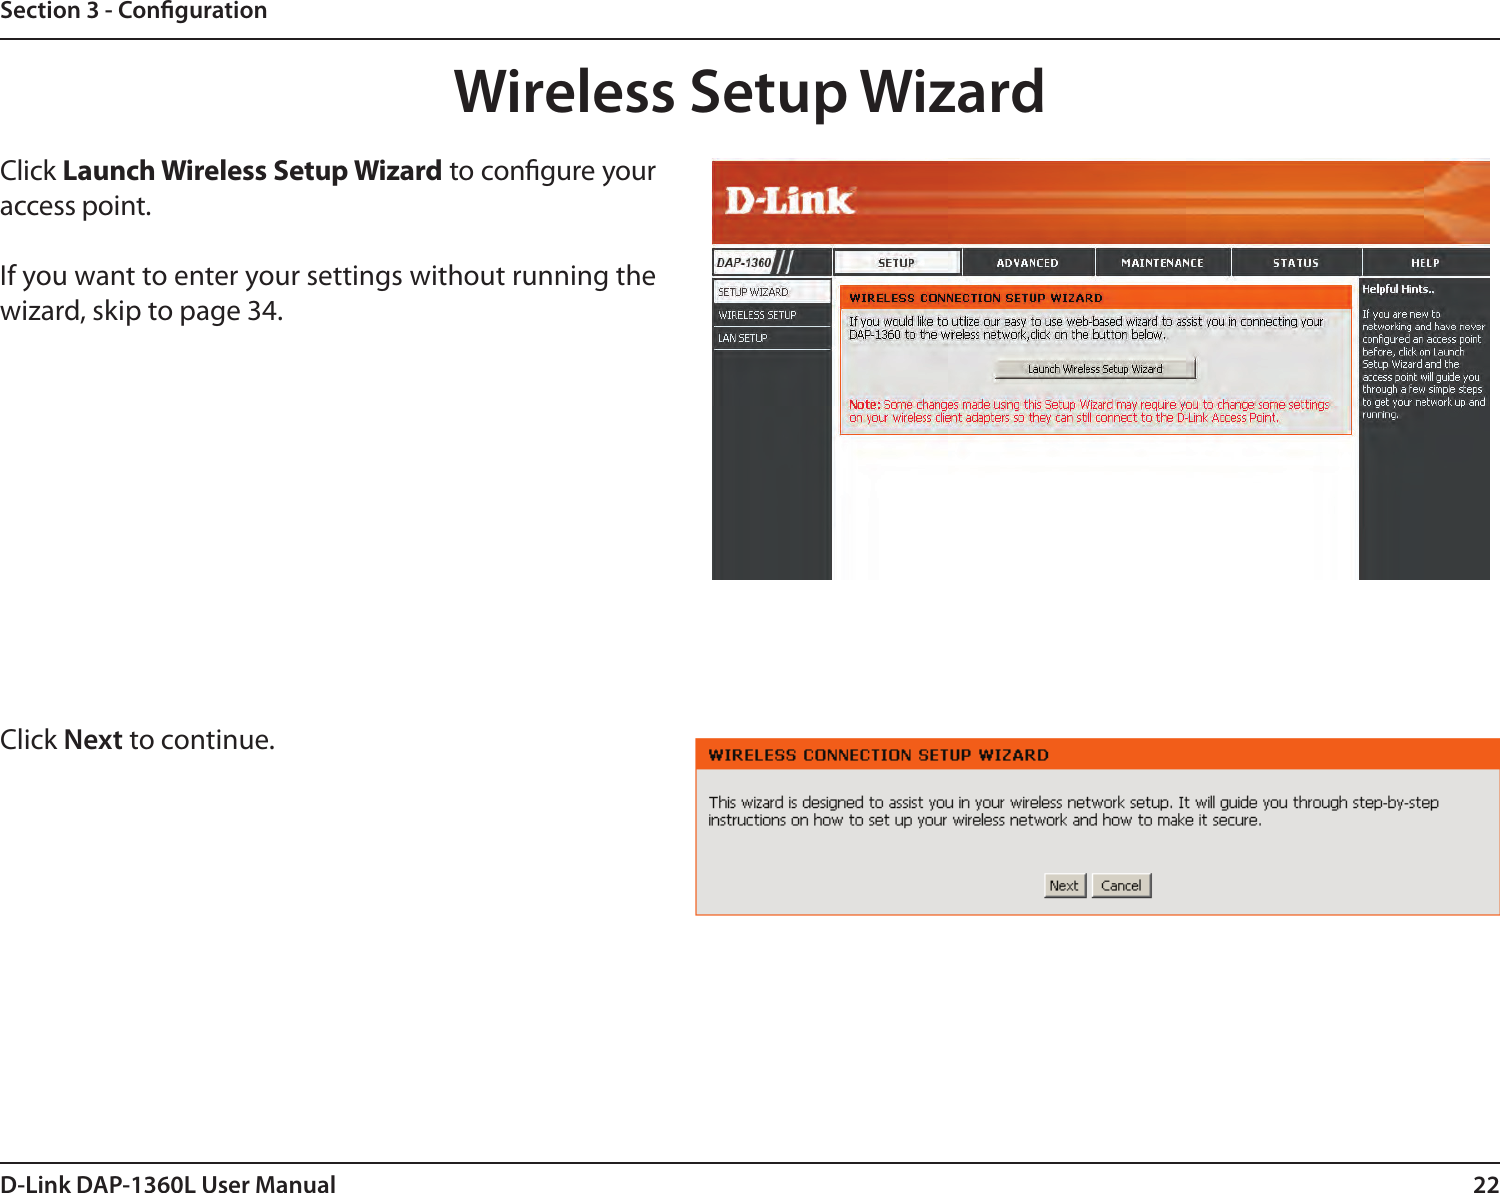 22D-Link DAP-1360L User ManualSection 3 - CongurationClick Launch Wireless Setup Wizard to congure your access point.If you want to enter your settings without running the wizard, skip to page 34.Wireless Setup WizardClick Next to continue. 